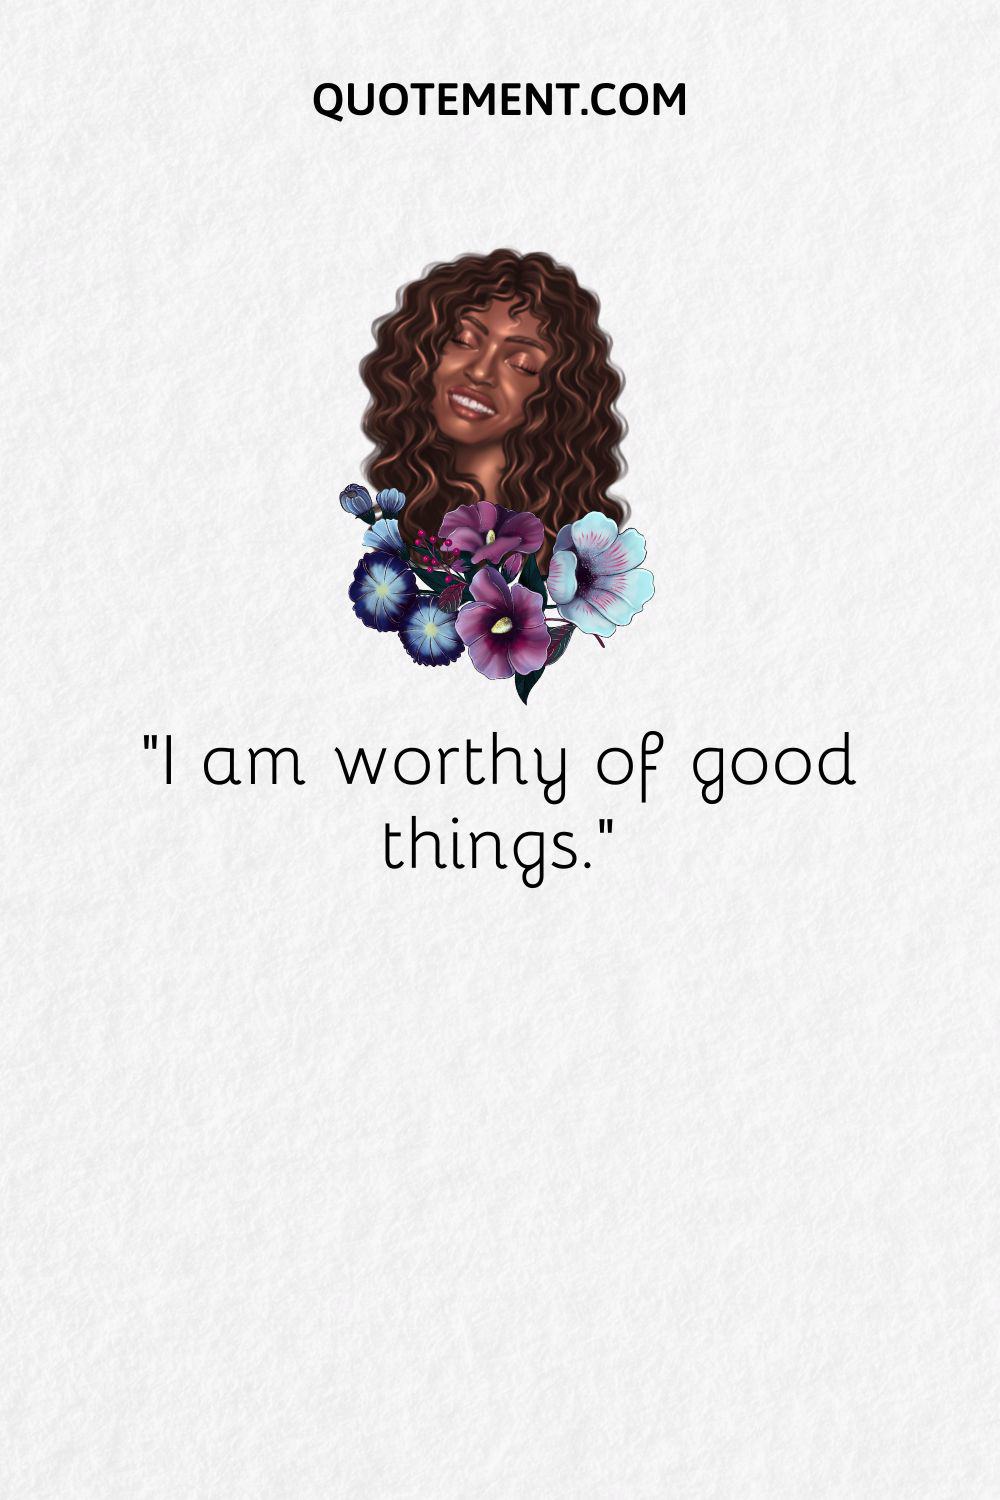 I am worthy of good things